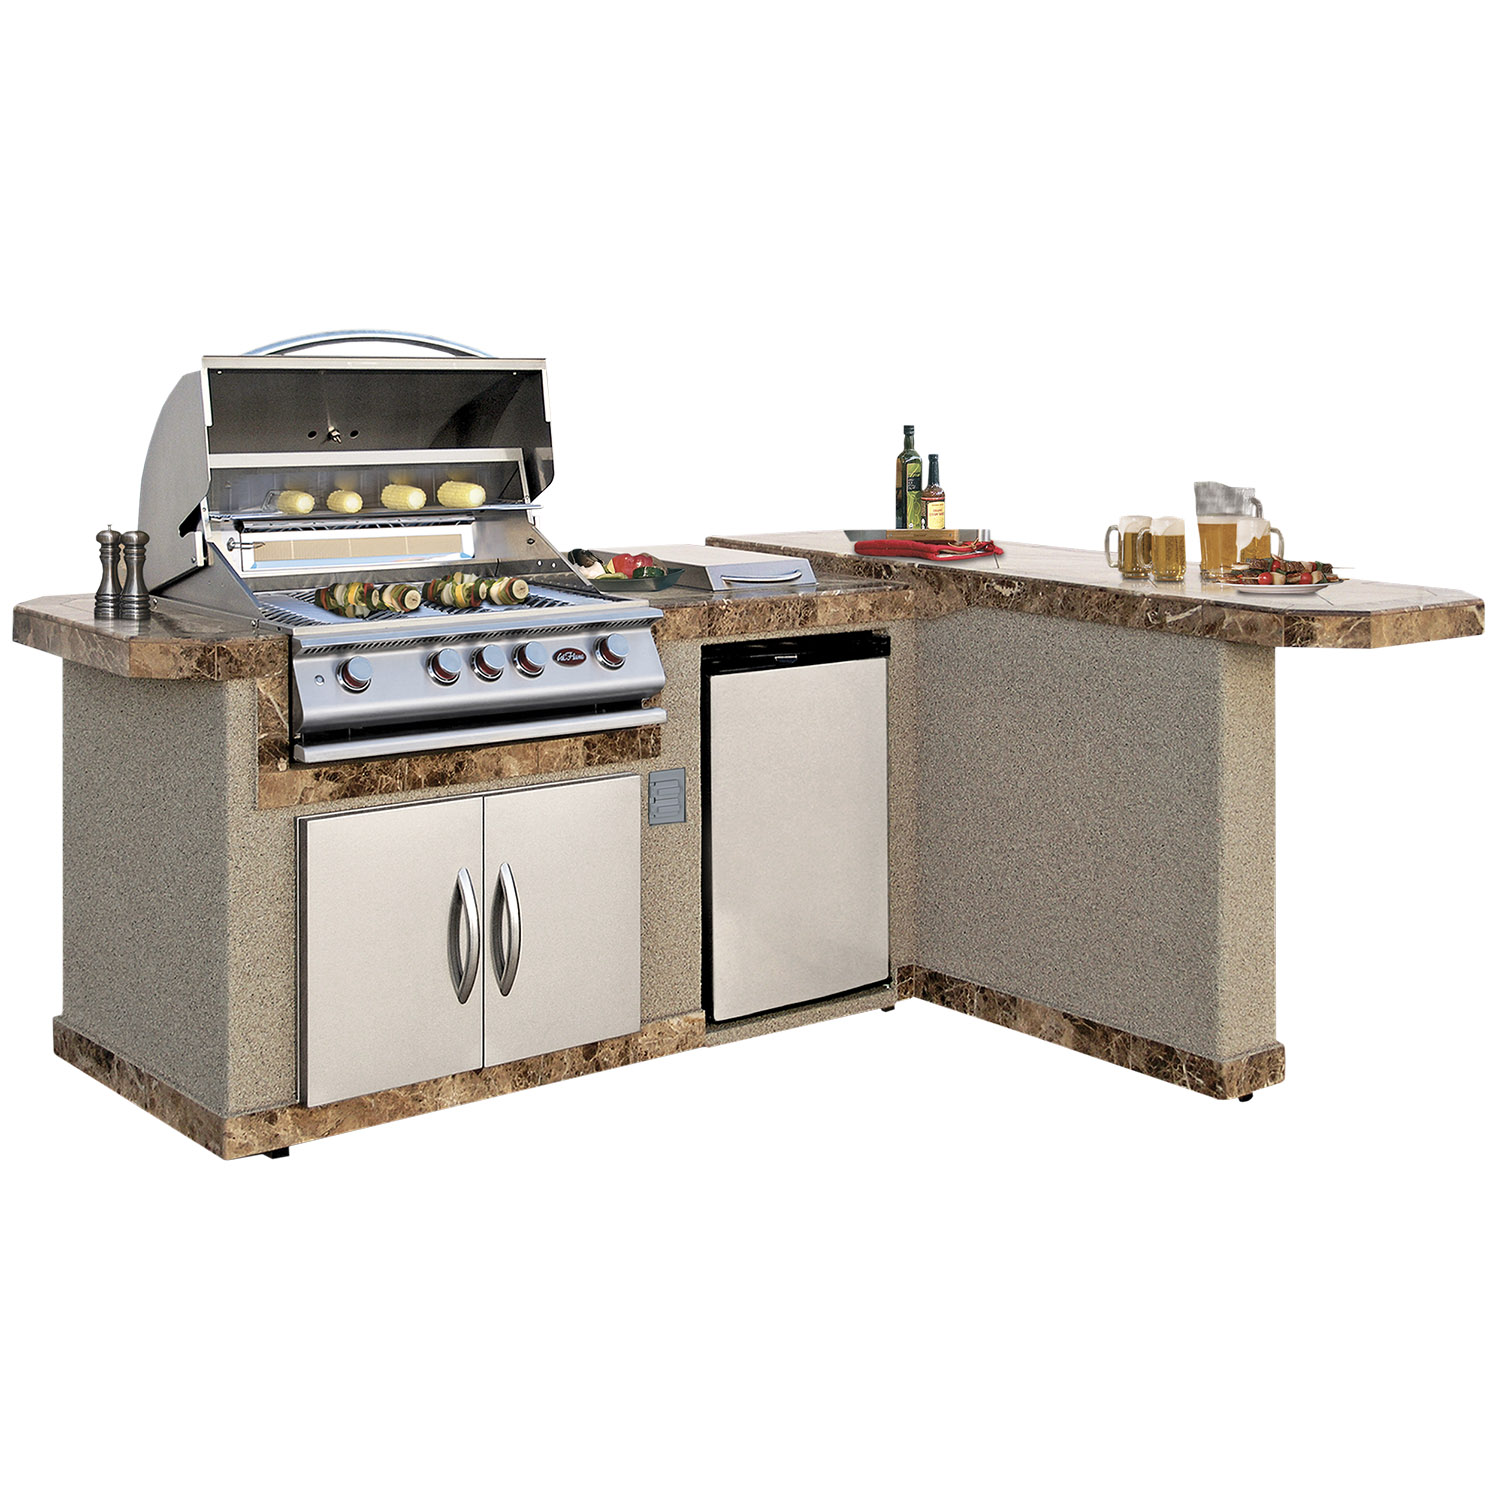 TN PREMIER OUTDOOR USA Close Out Kitchens